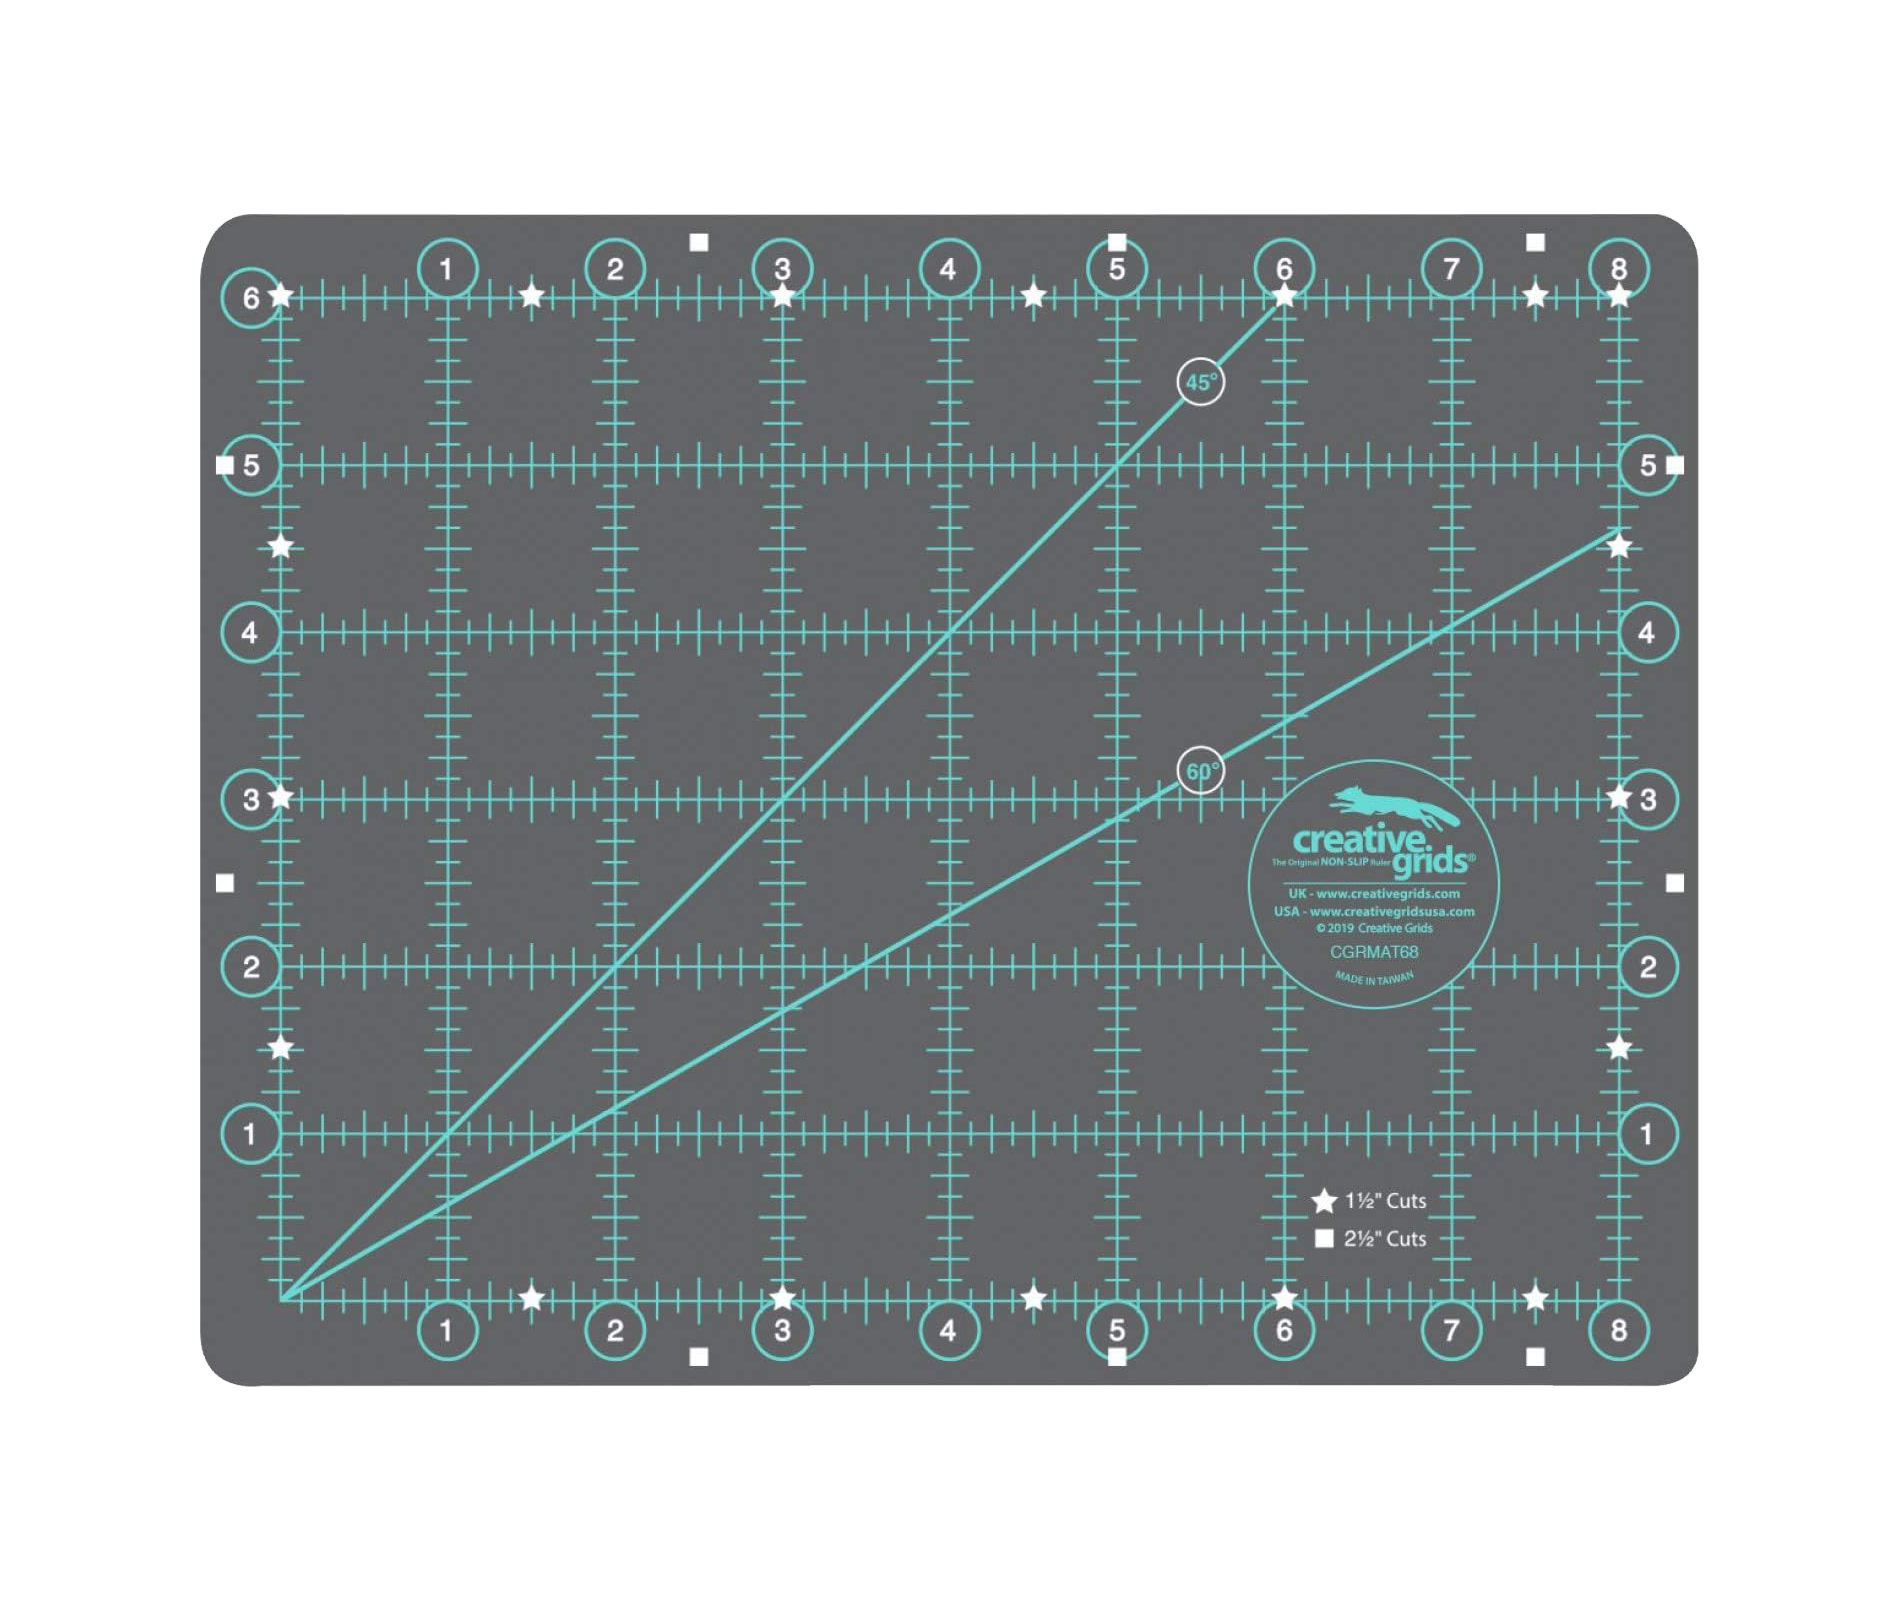 Creative Grids Self-Healing Cutting Mat 6"x8" CGRMAT68 for Sale at World Weidner